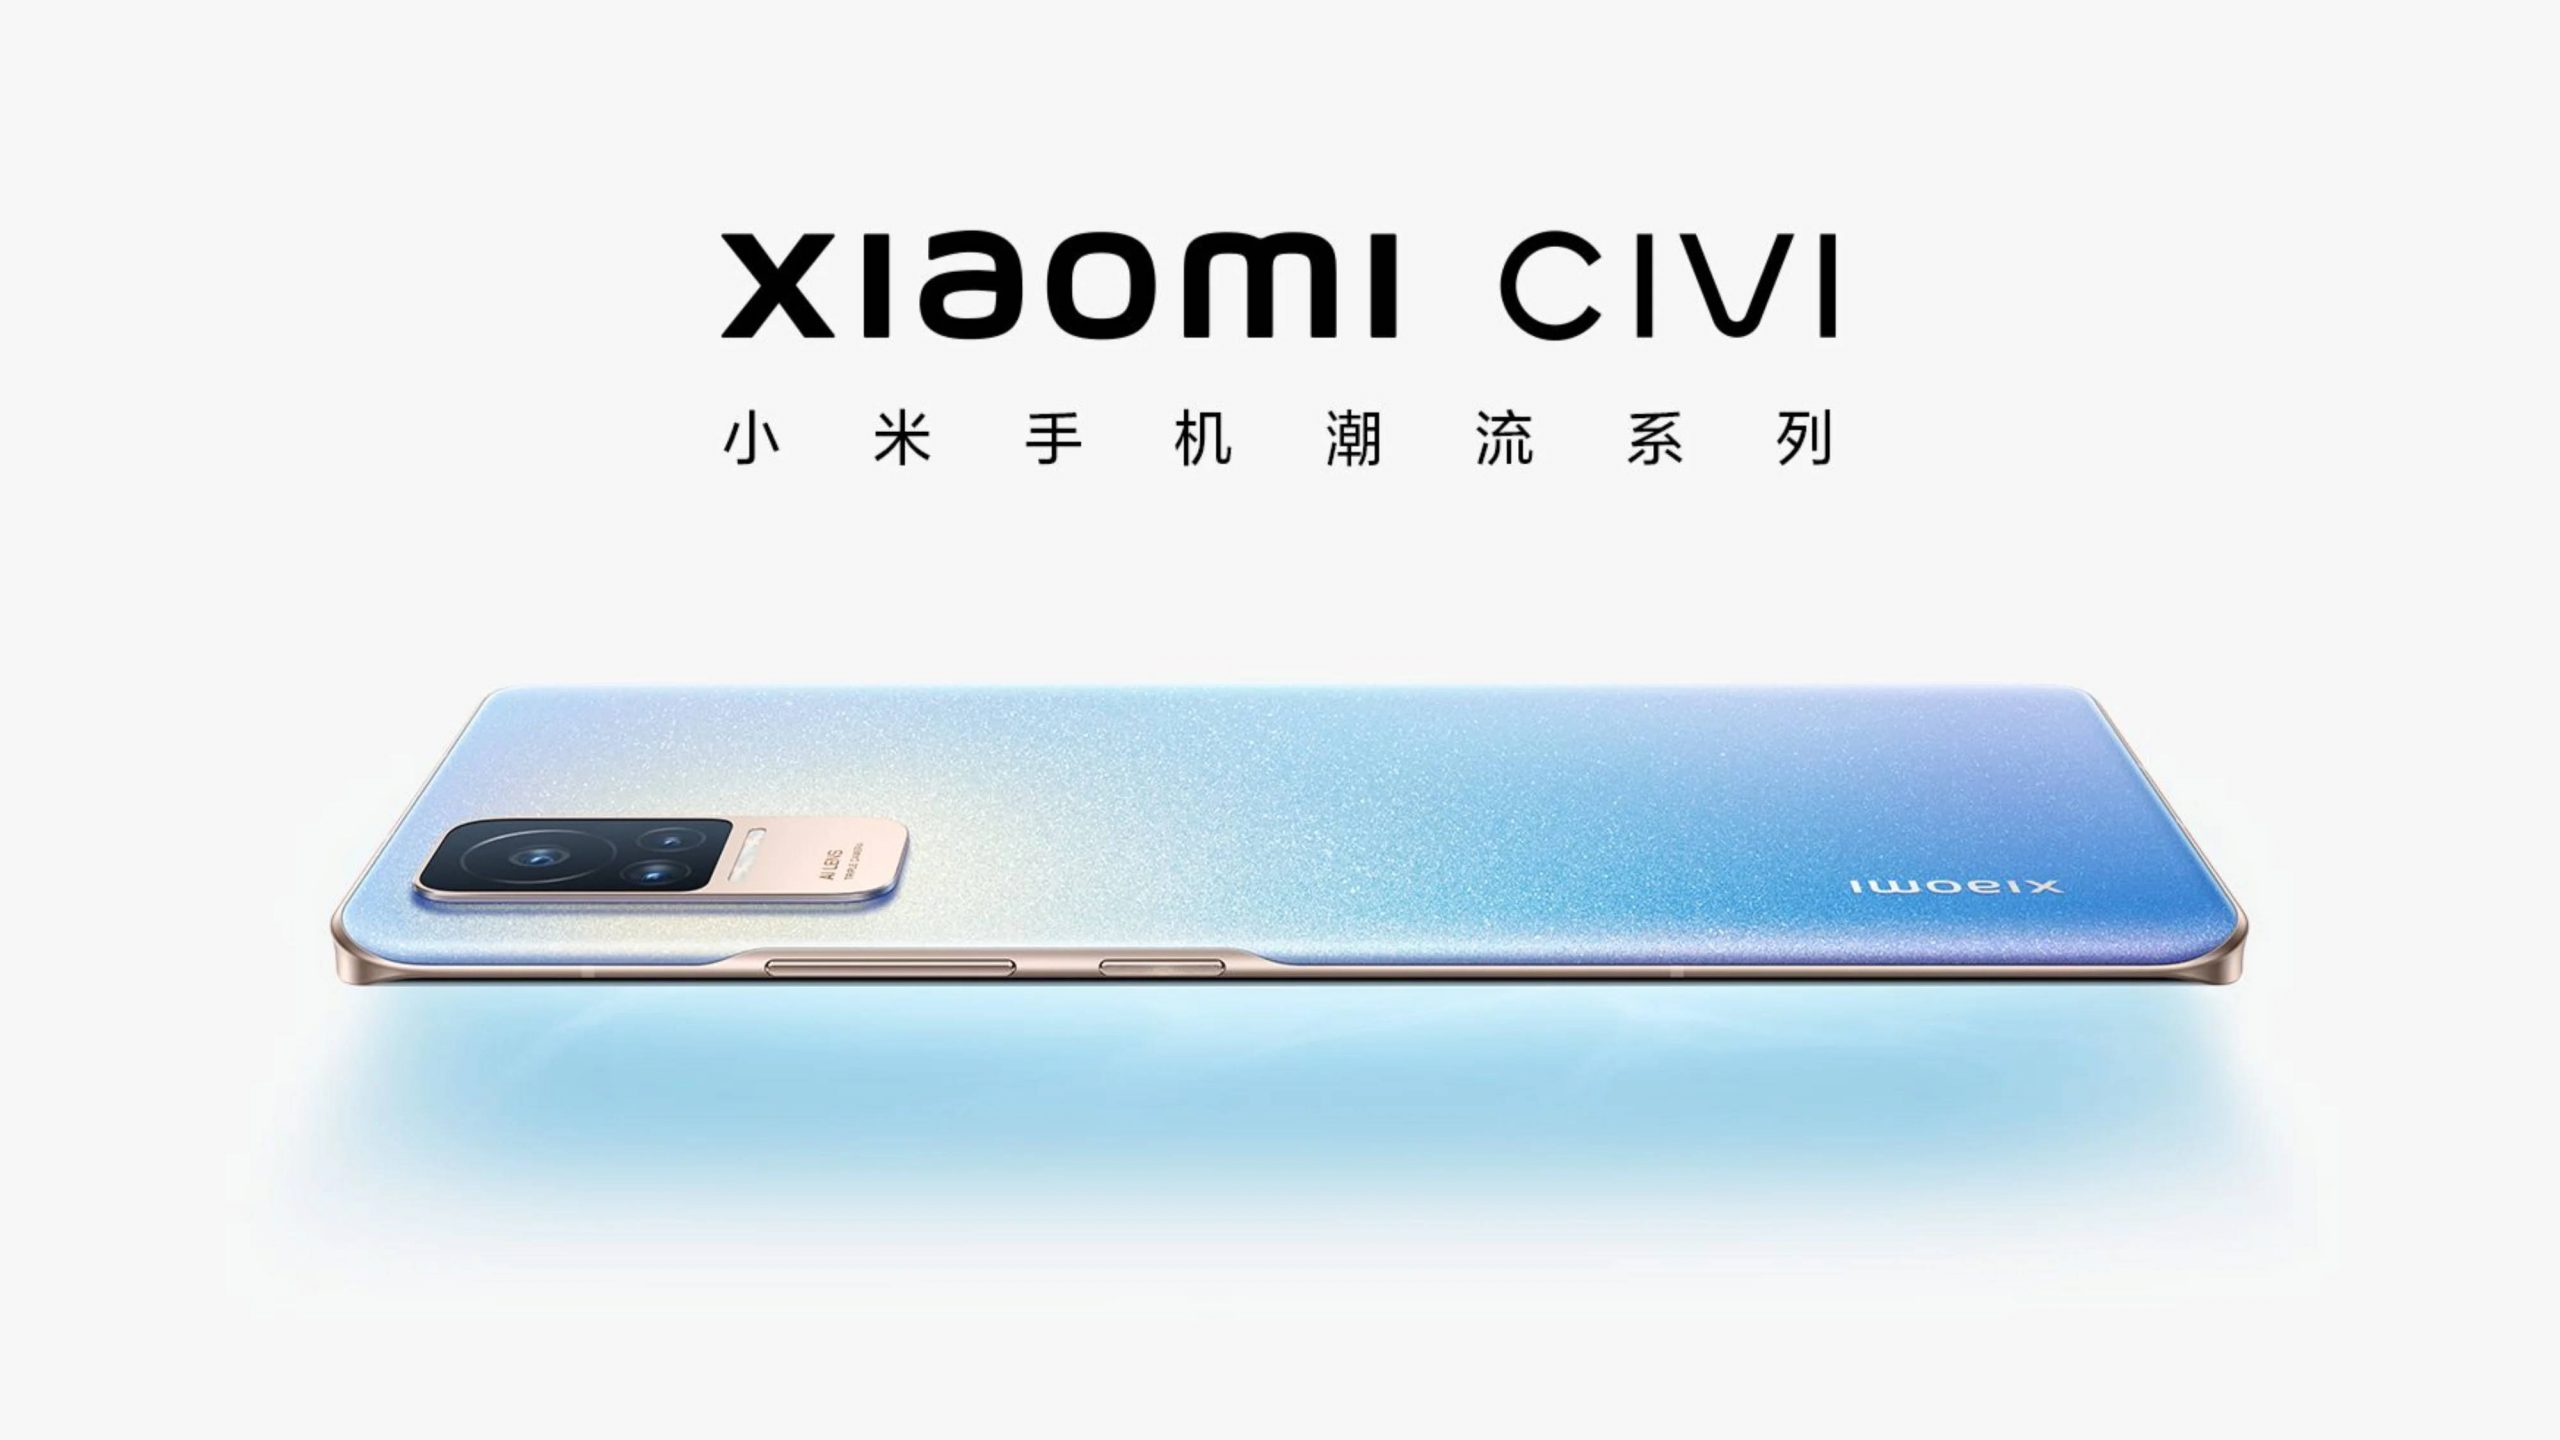 Xiaomi Civi looks amazing, but what about the specification?